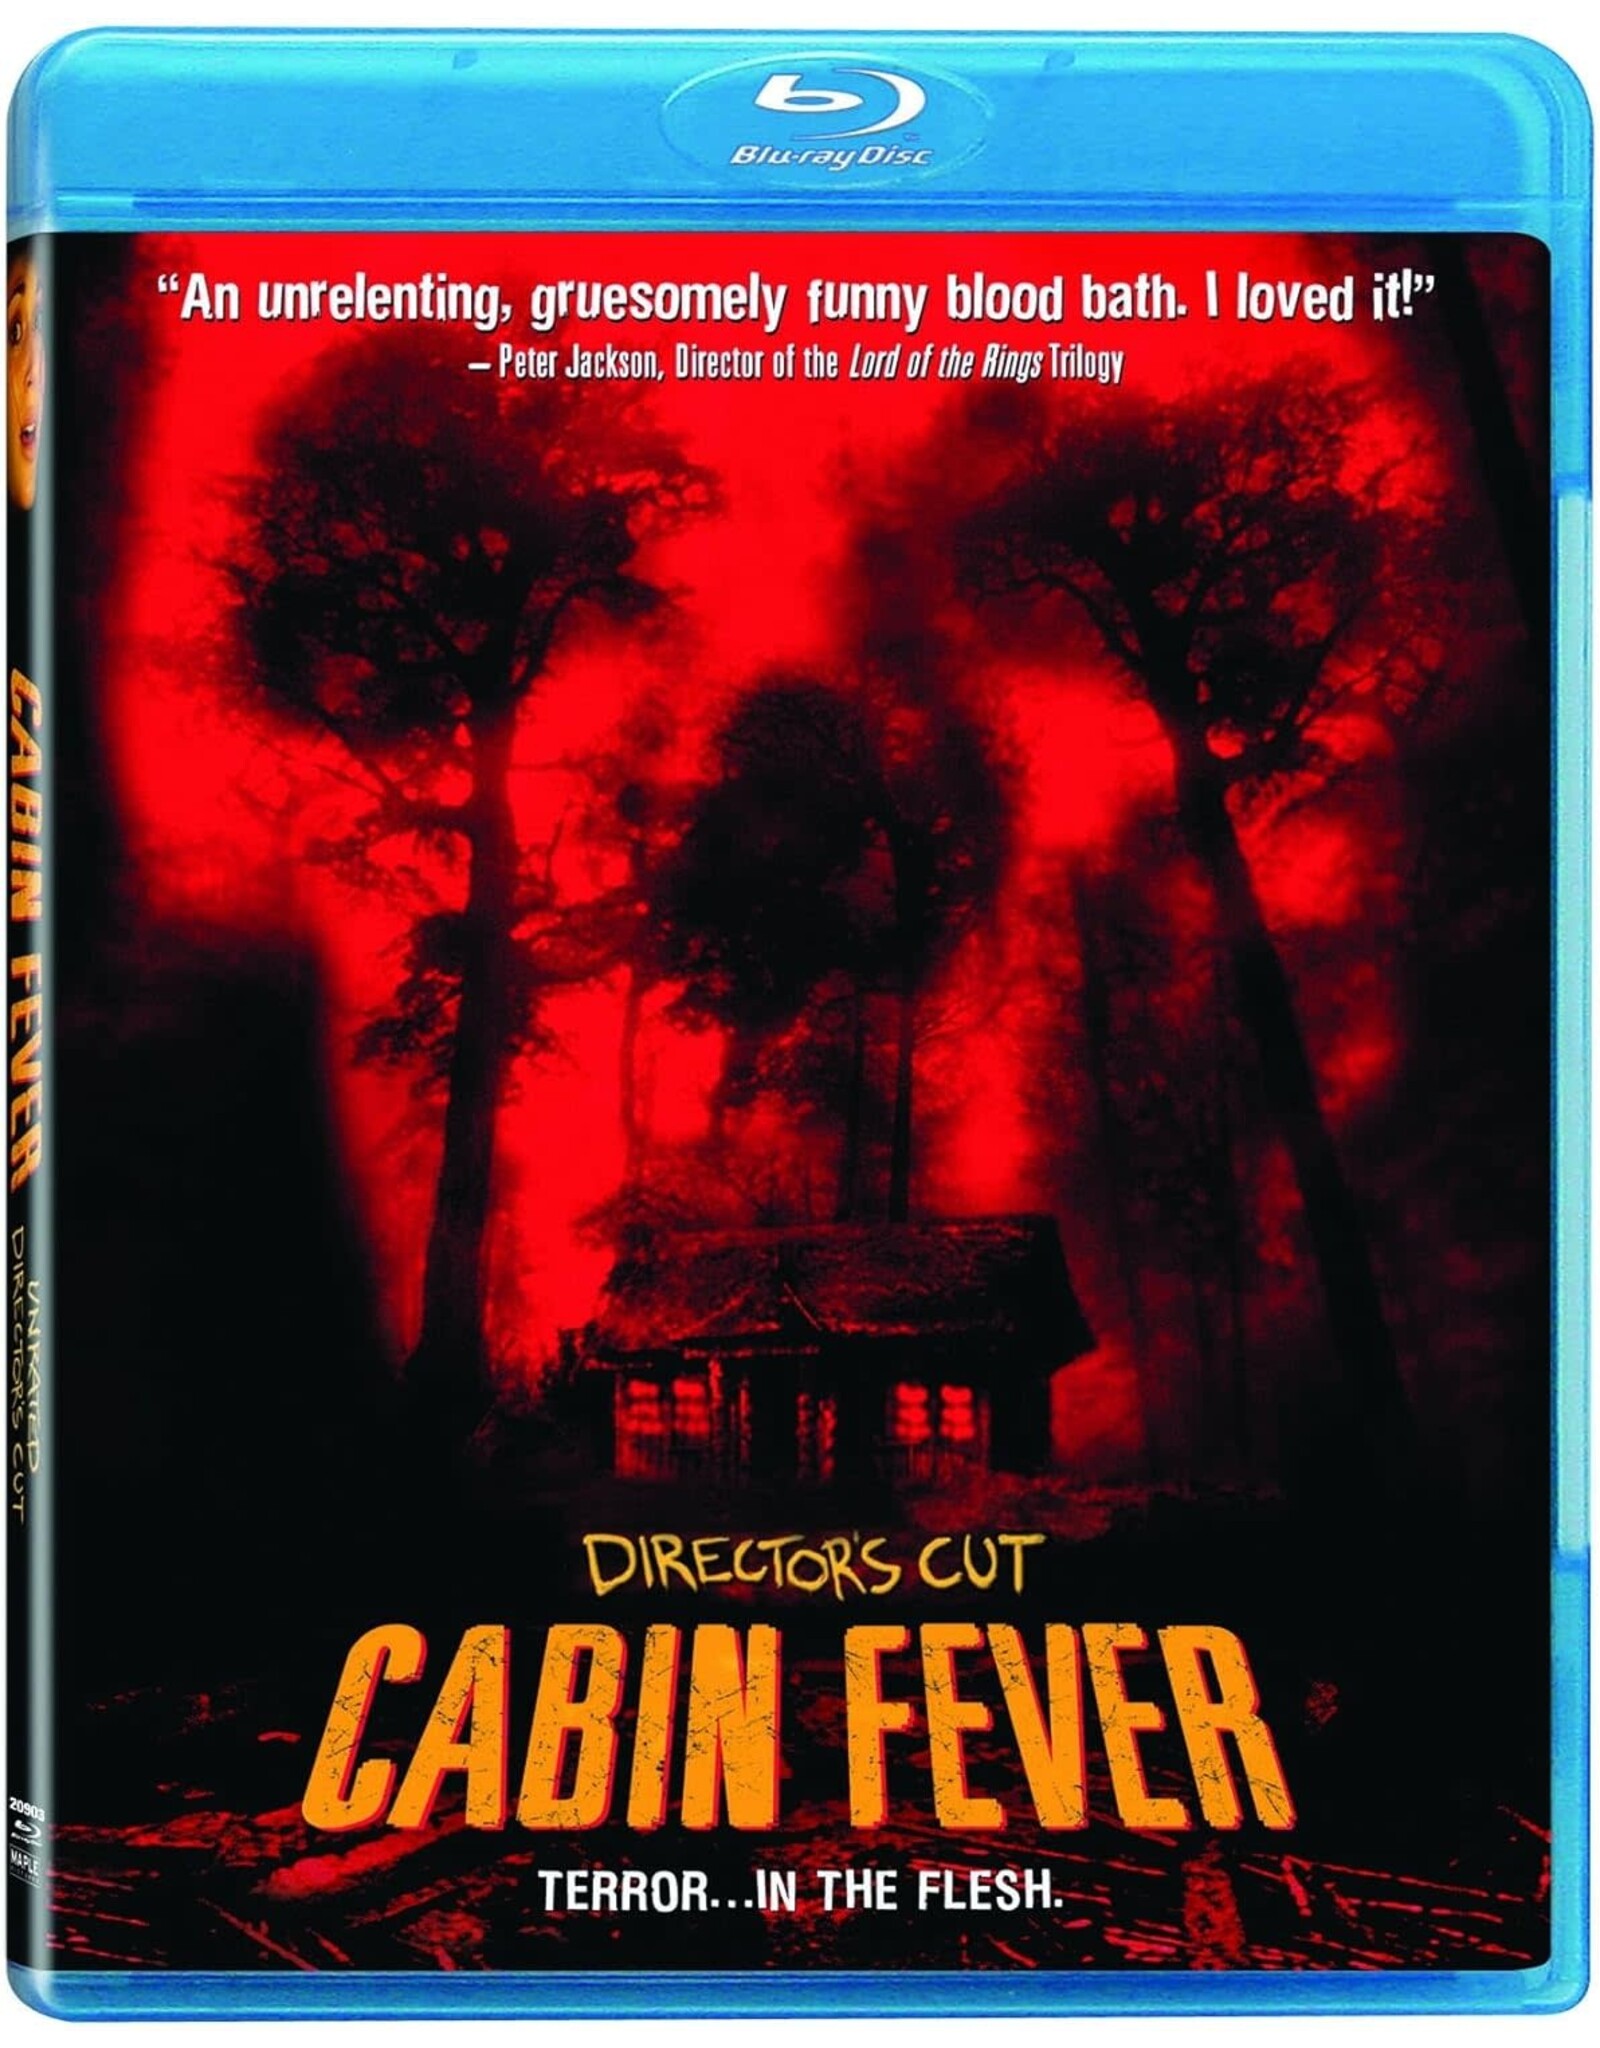 Horror Cabin Fever 2002 Director's Cut (Used)